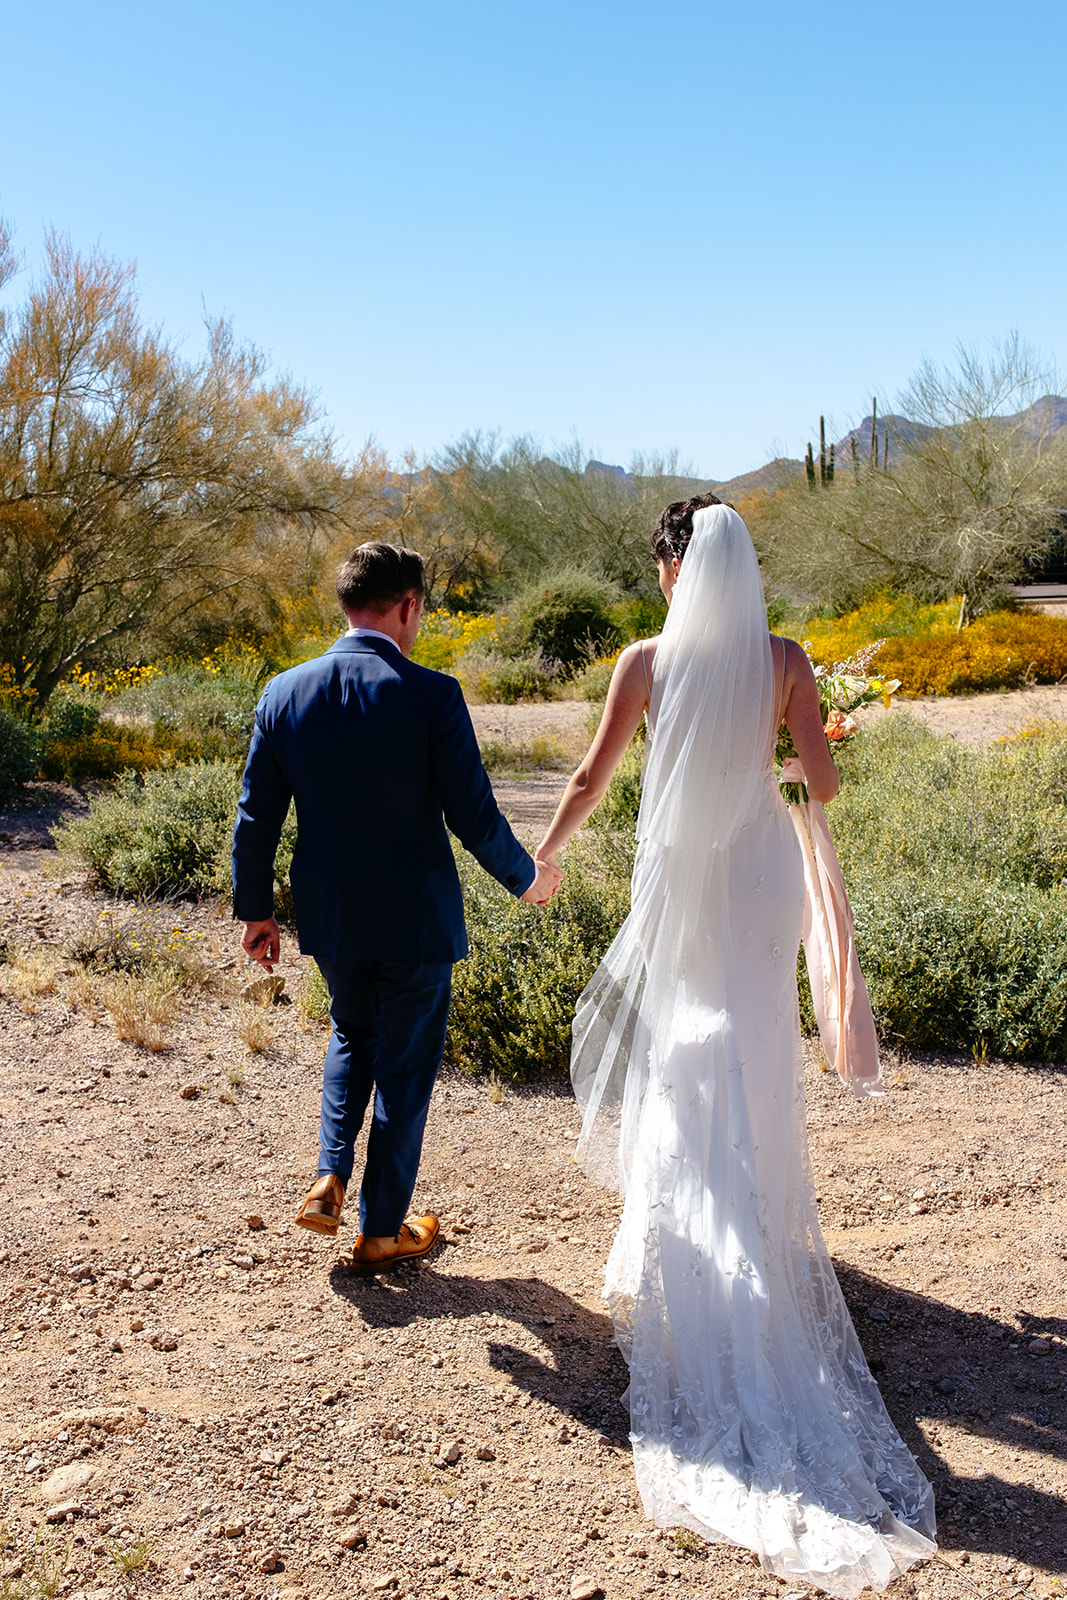 A bride in a white dress and veil walks hand-in-hand with a groom in a blue suit through a desert landscape during daytime.